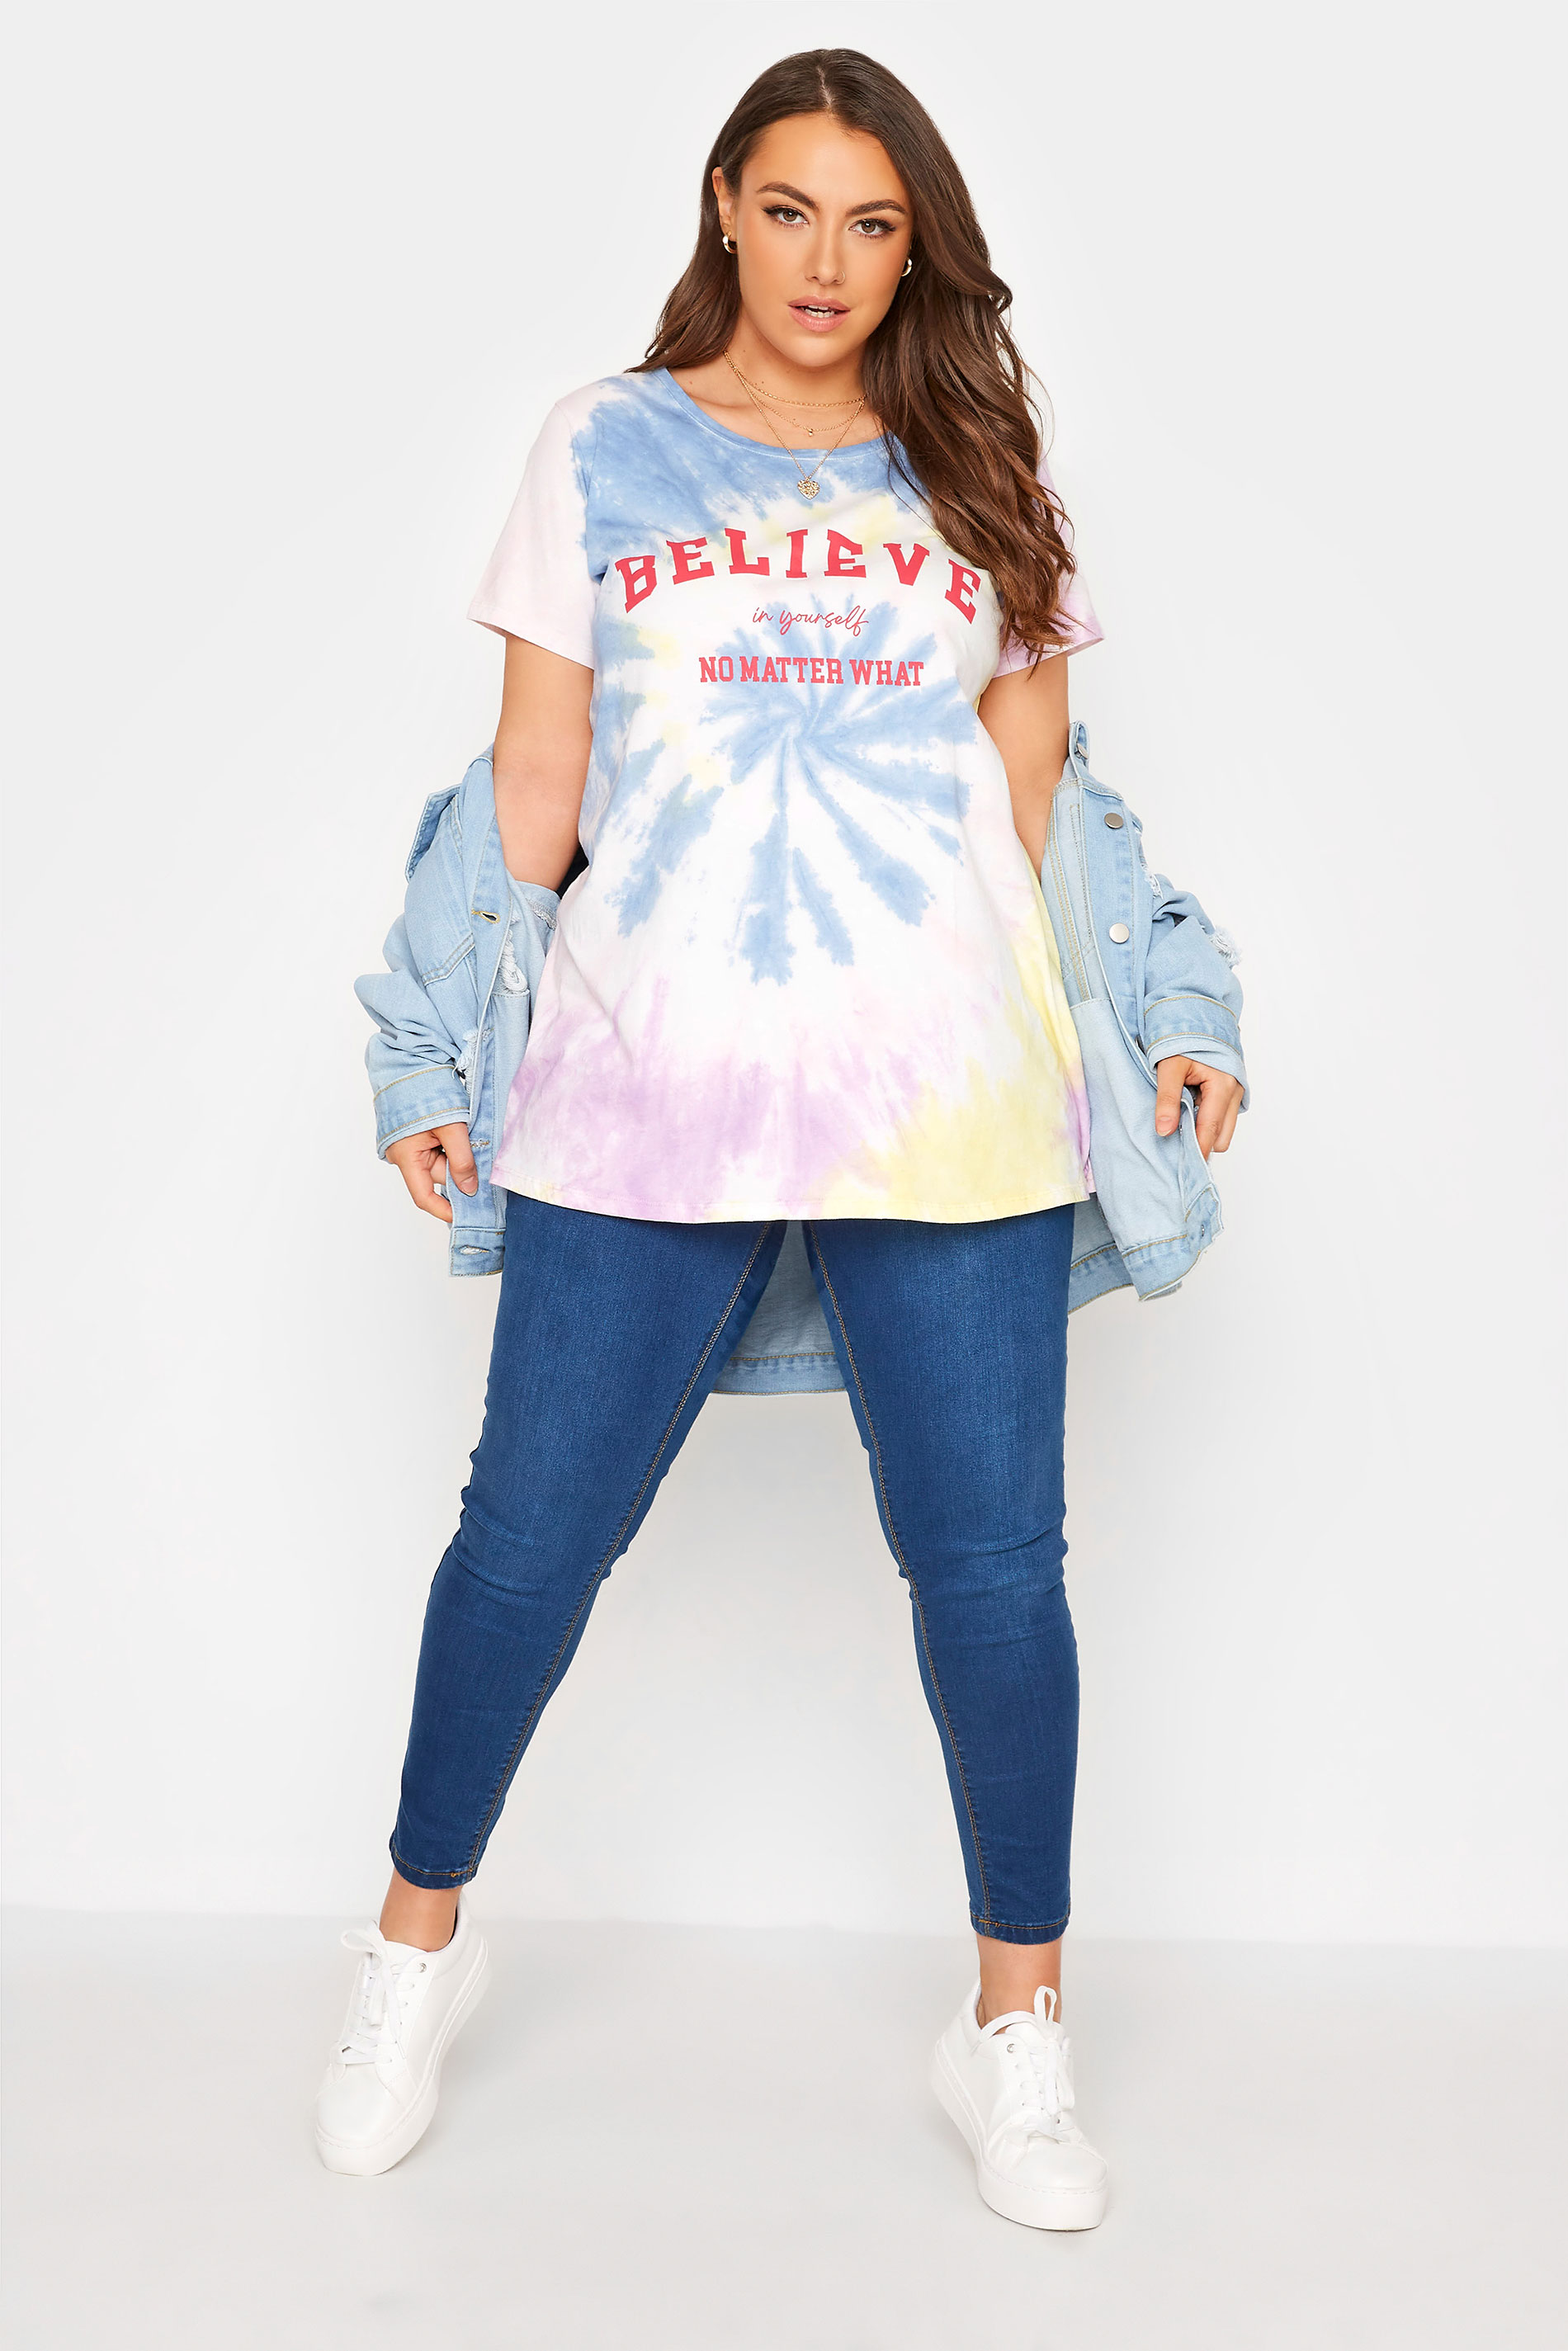 Grande taille  Tops Grande taille  Tops à Slogans | T-Shirt Blanc Tie & Dye 'Believe in Yourself' - VY48738